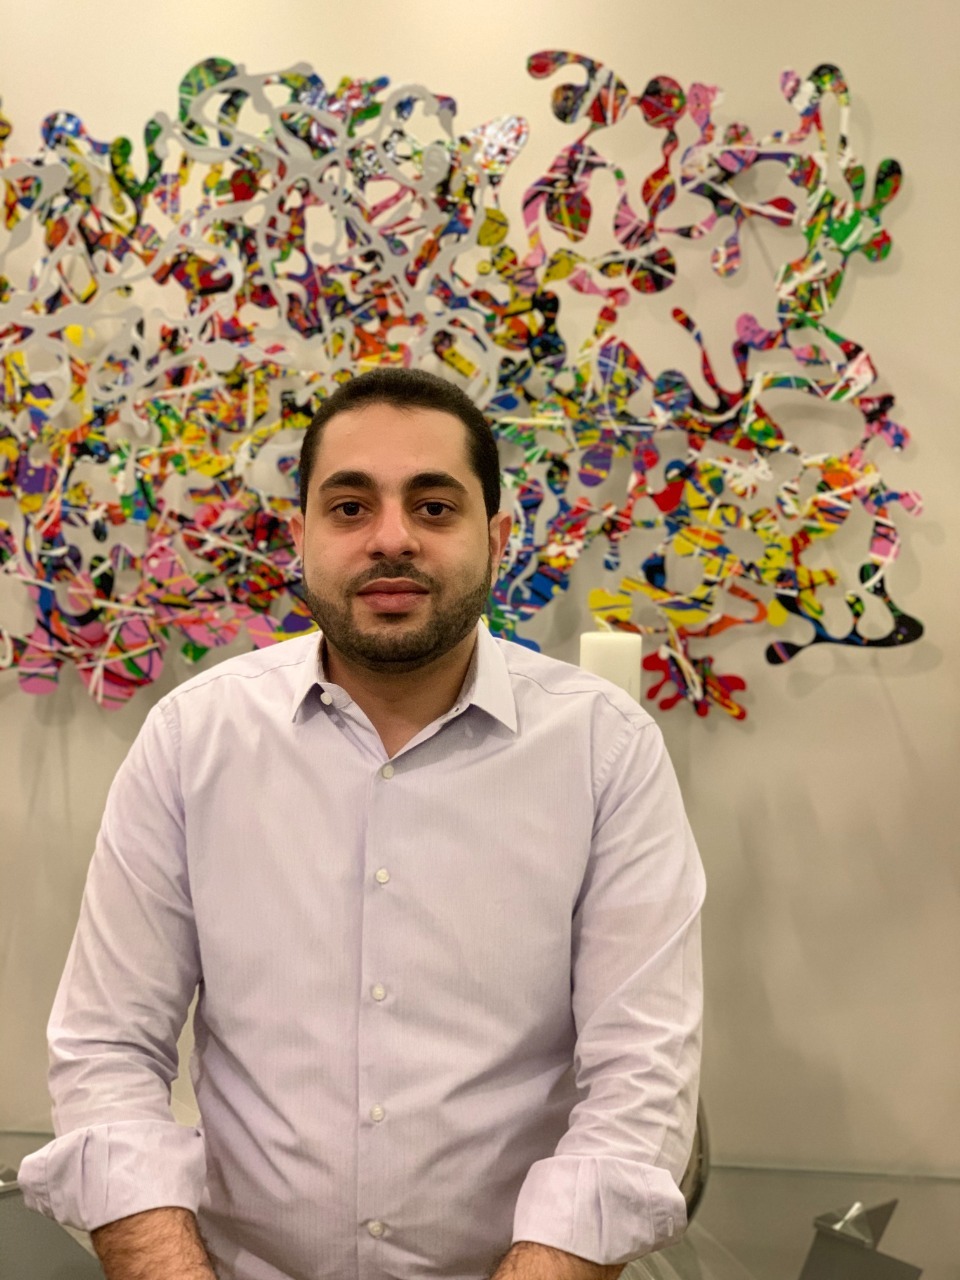 Omar Al-Khawaja is one of the leading professional investors in information technology and digitalization